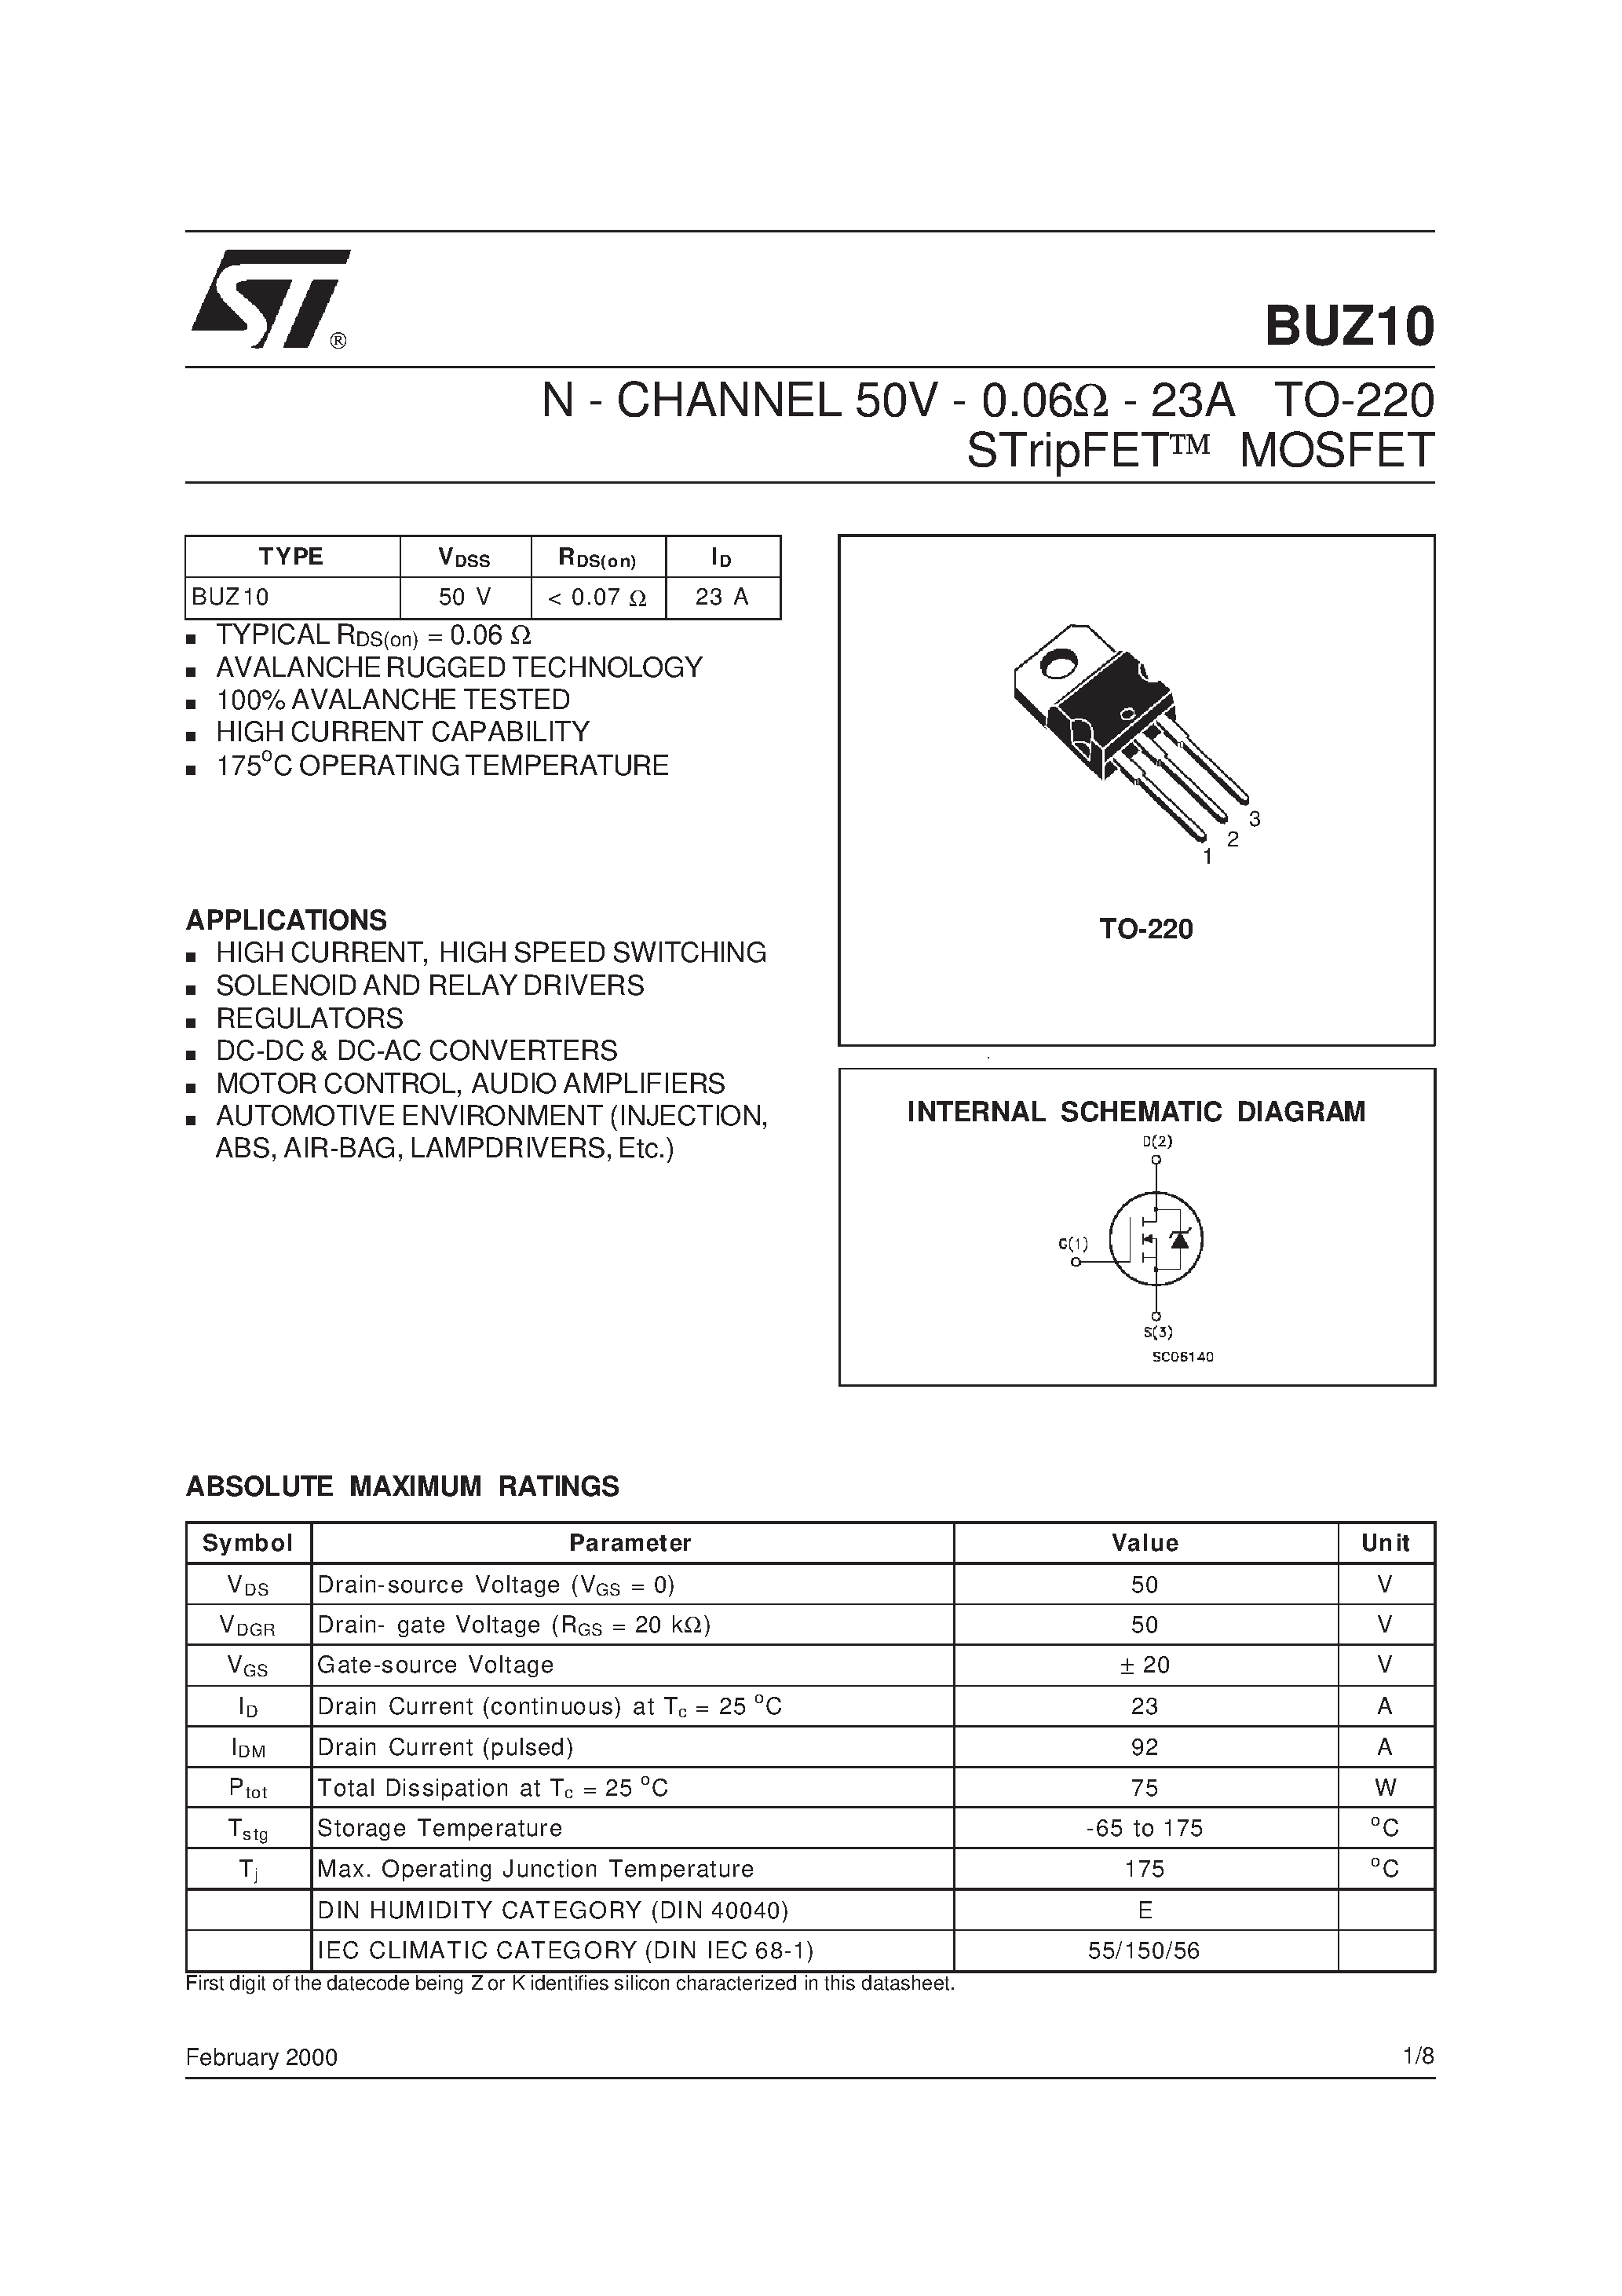 Даташит BUZ10 - N - CHANNEL 50V - 0.06W - 23A TO-220 STripFET] MOSFET страница 1